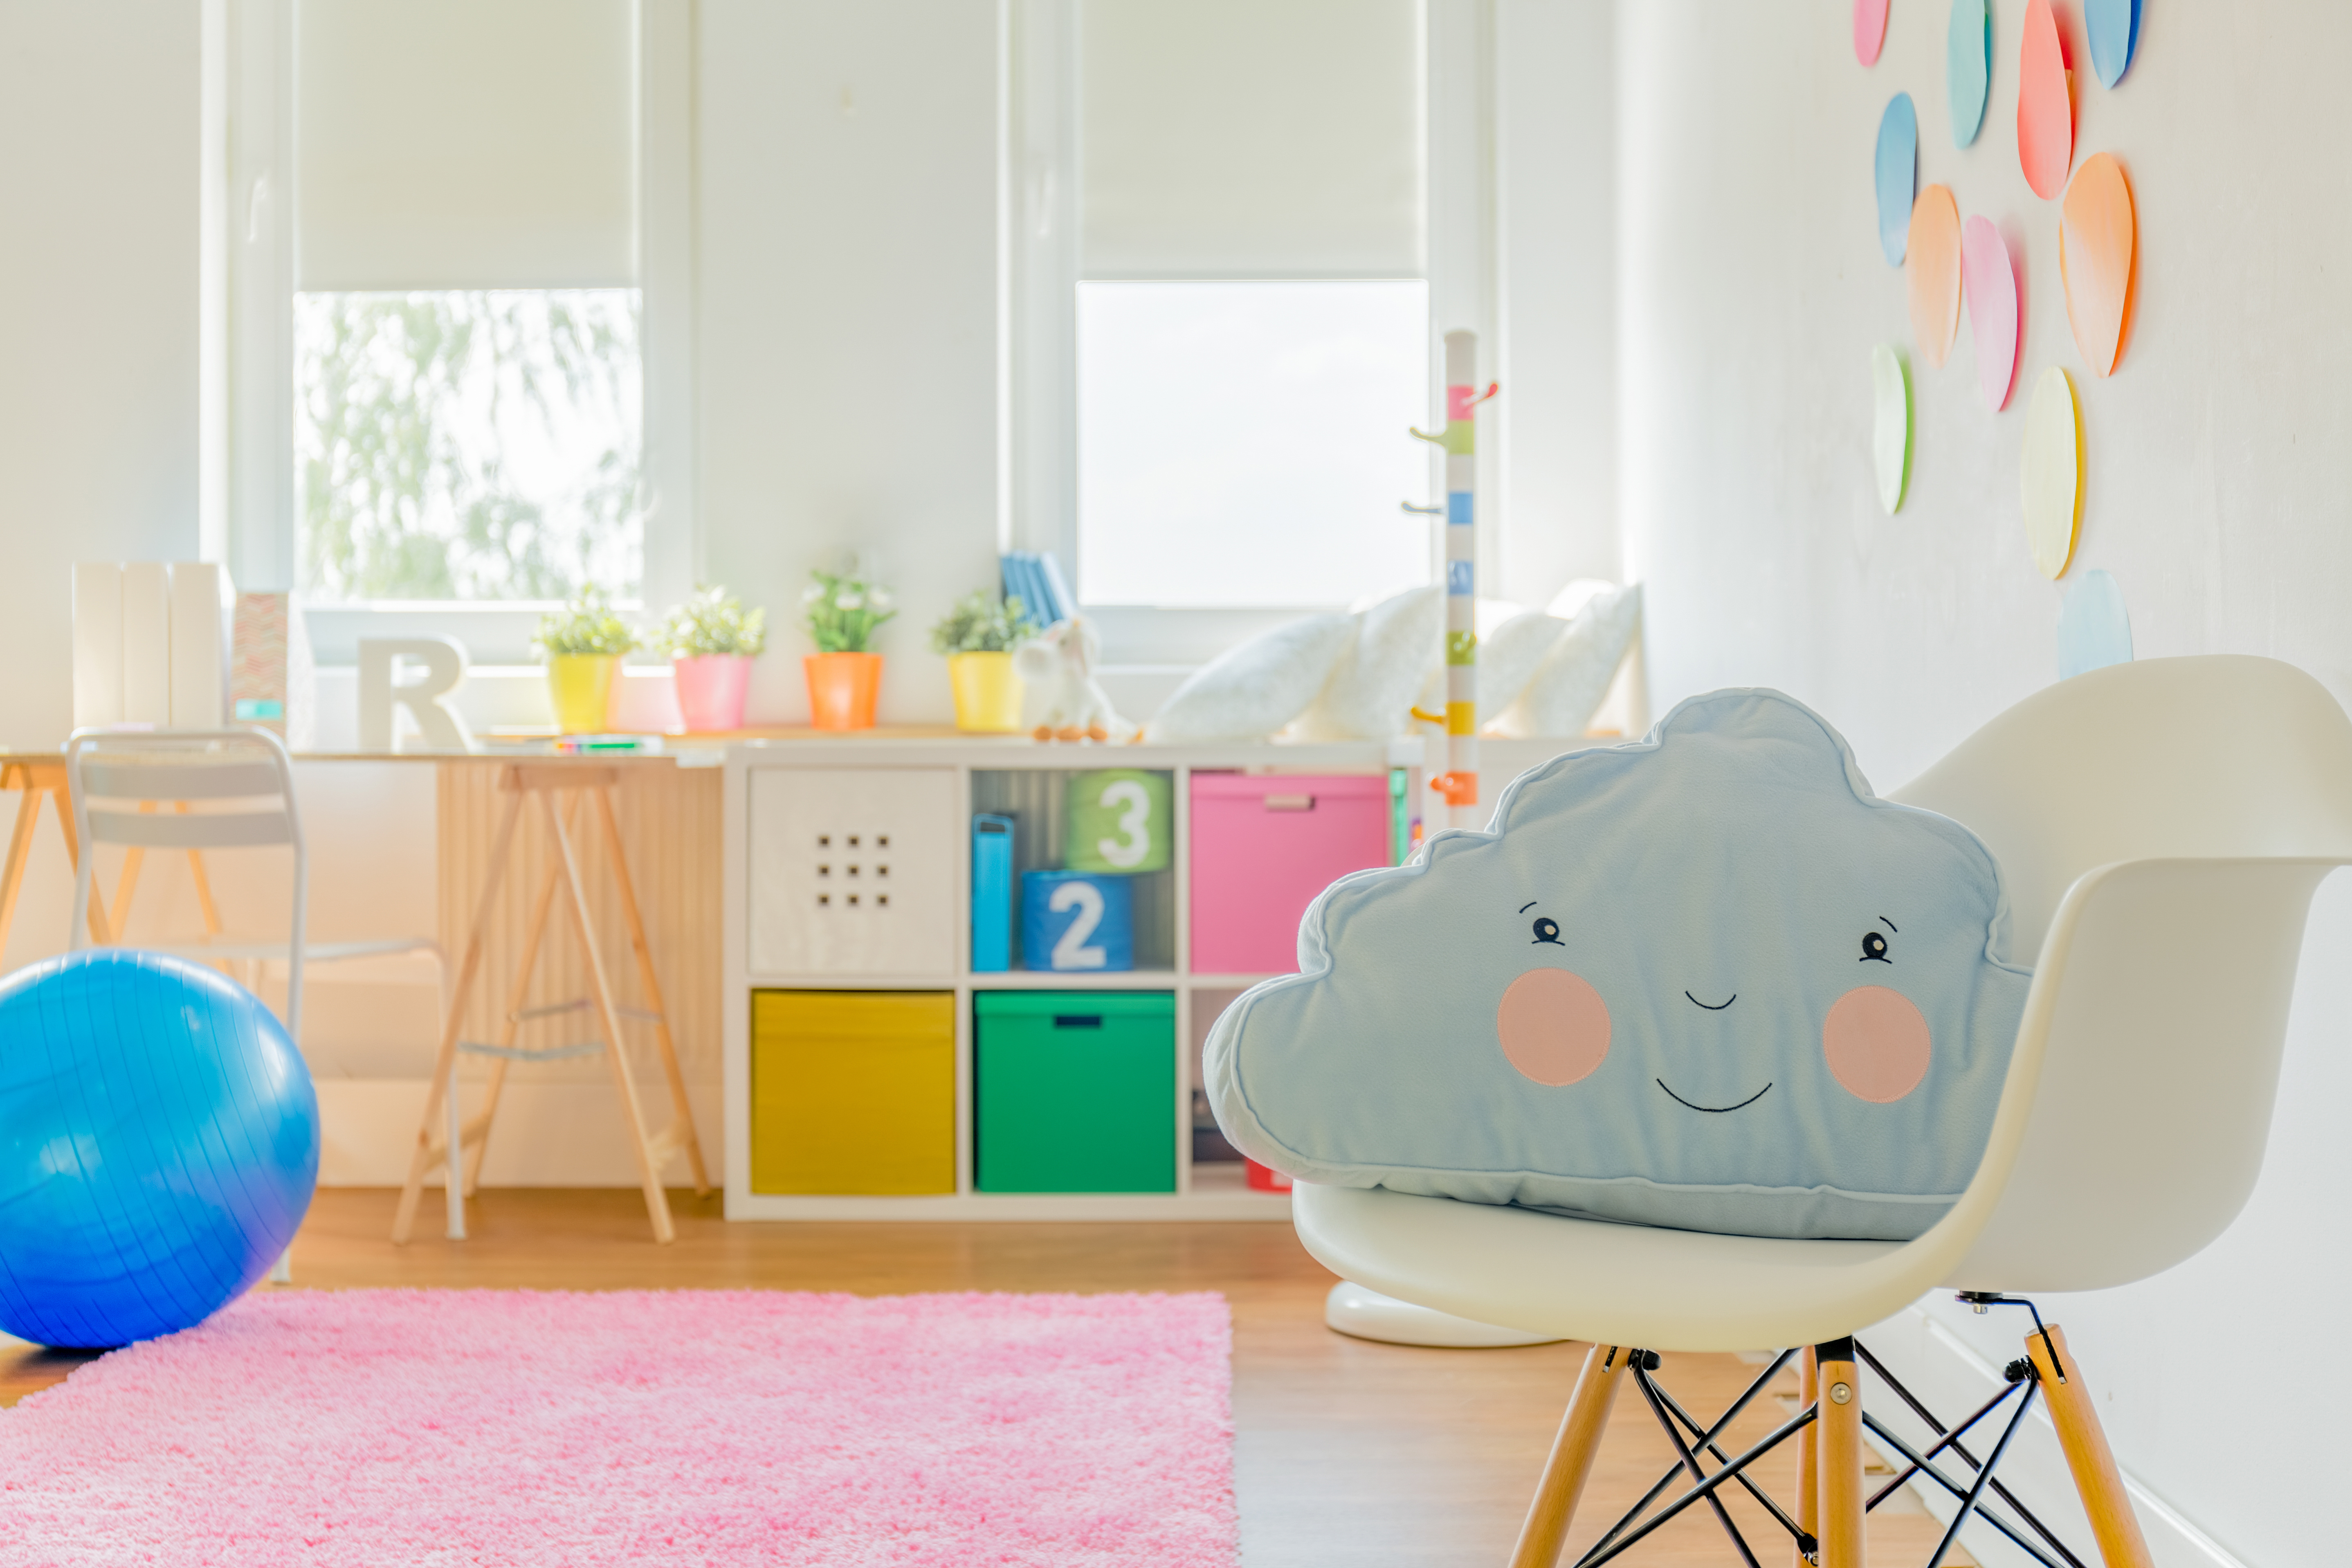 A colourful children's room and playroom by interior designers